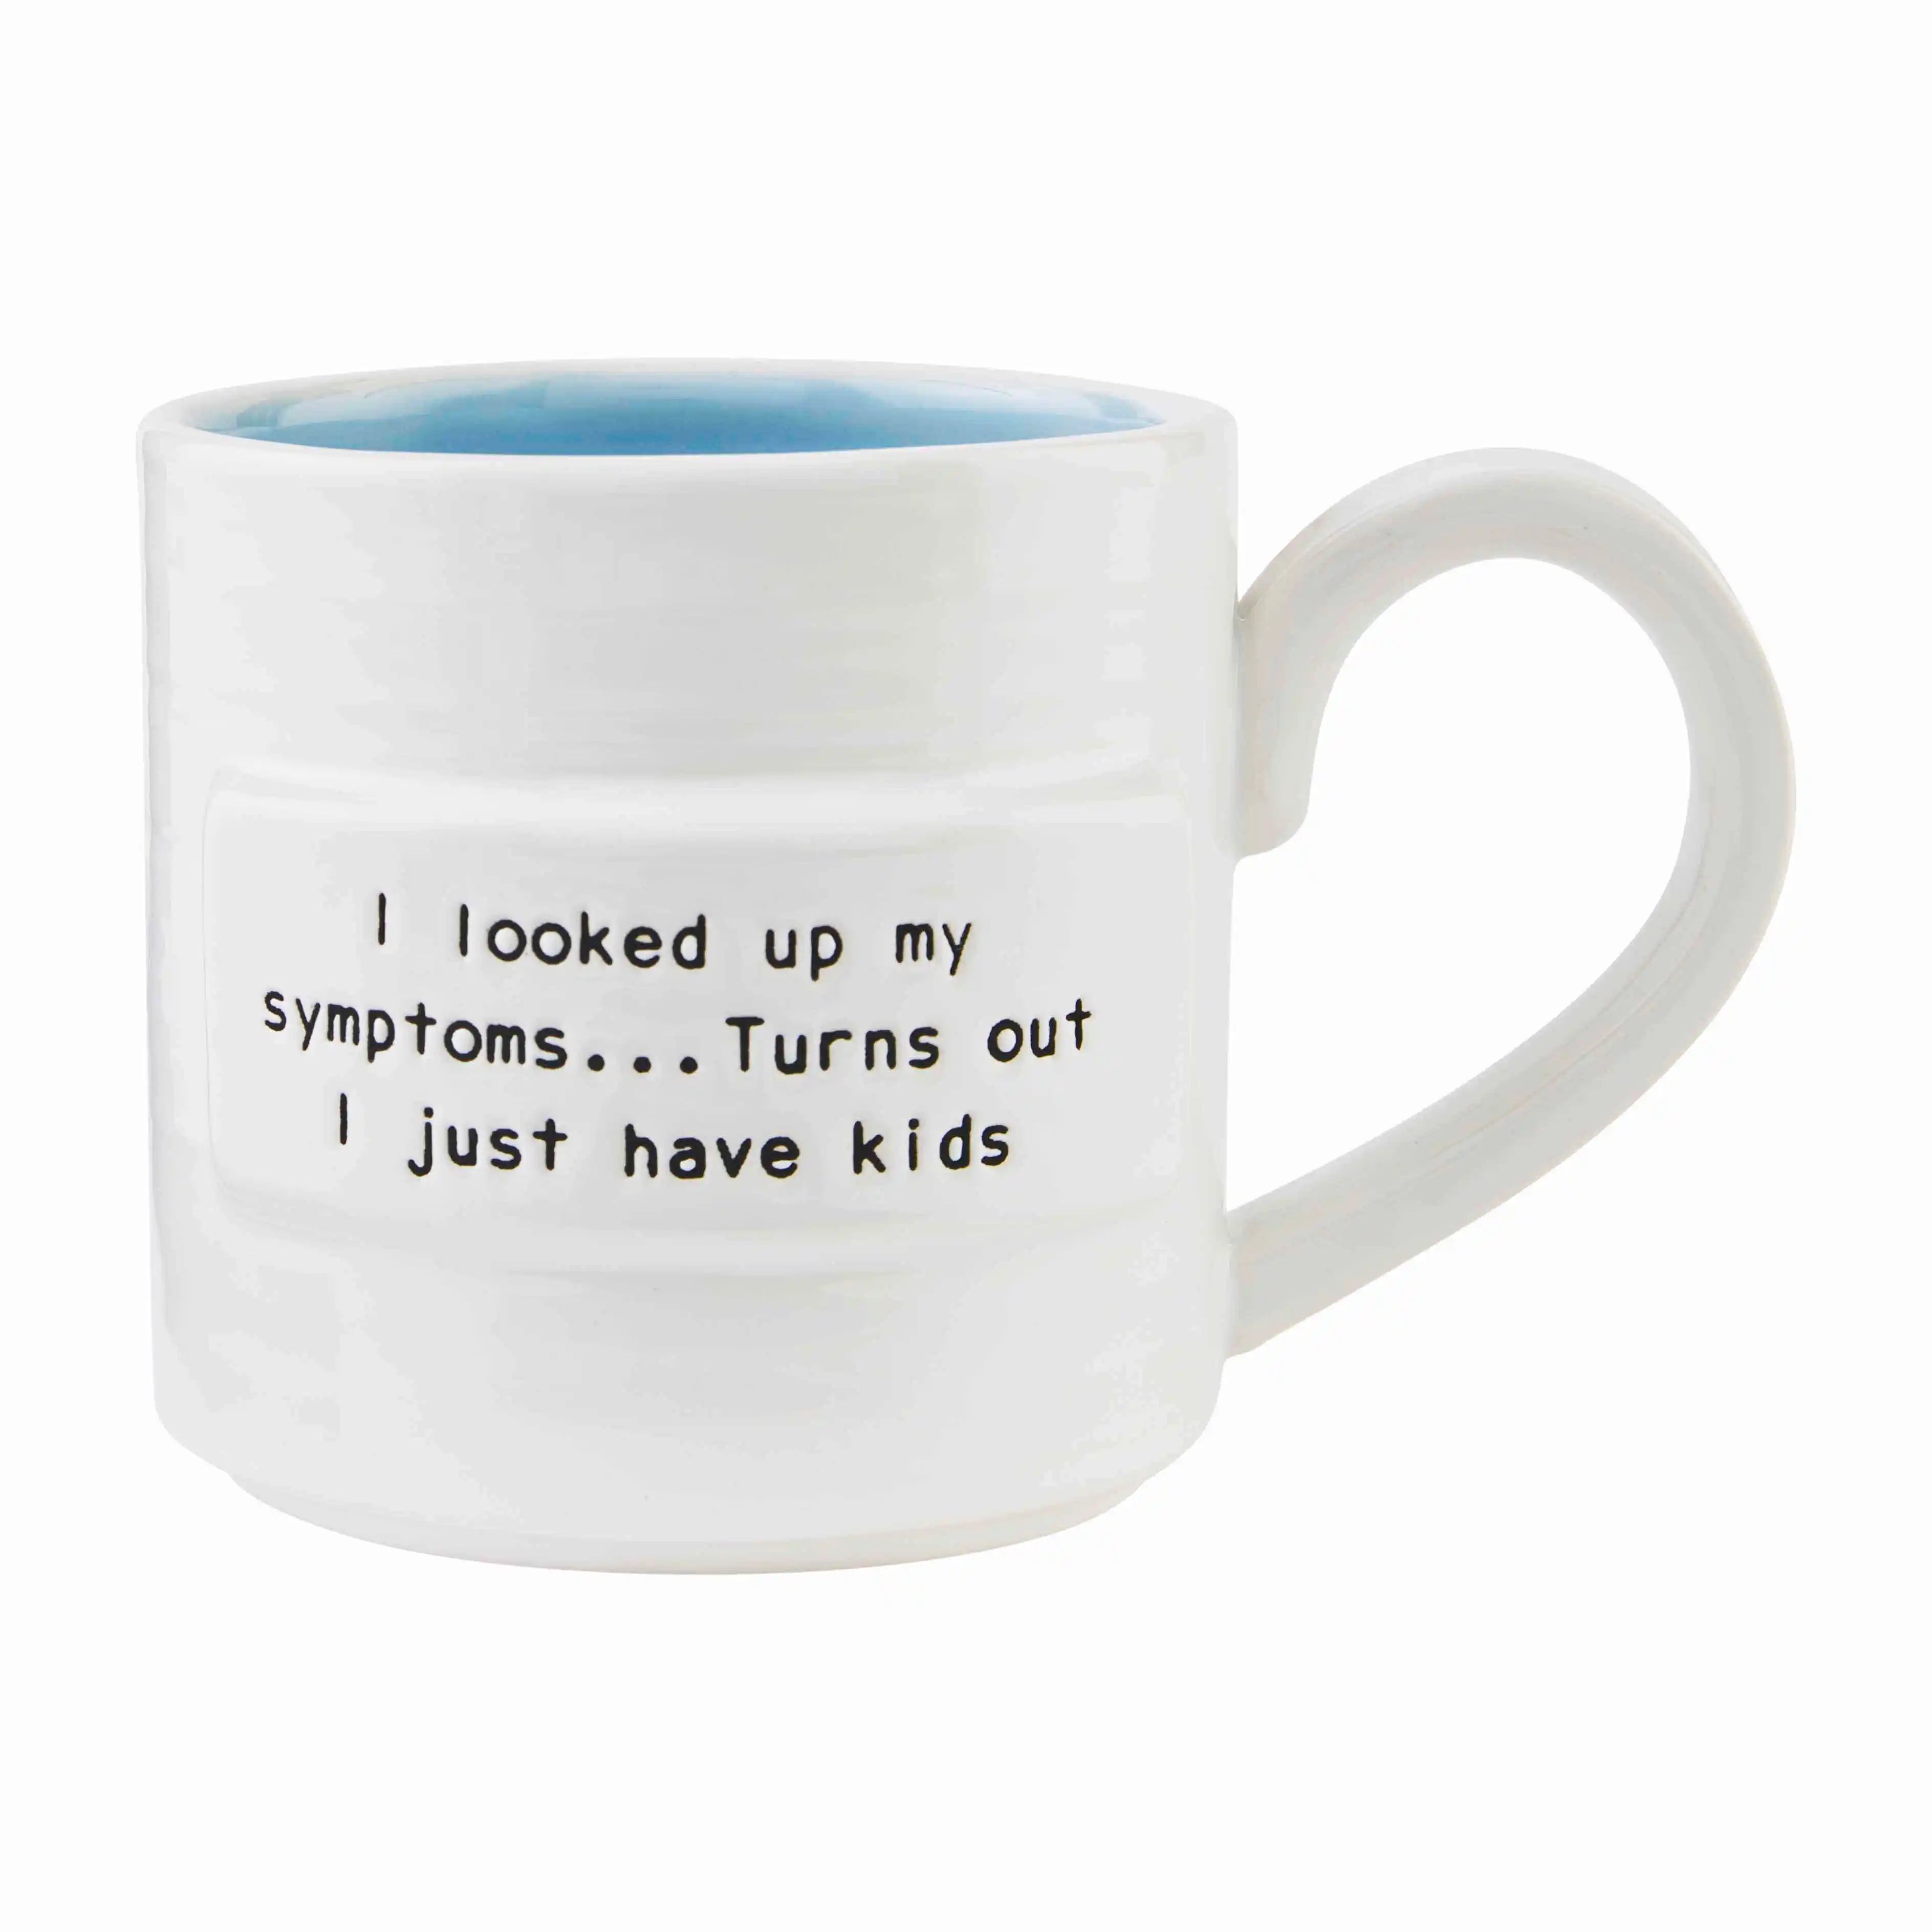 Symptoms Mom Sentiment Mug that reads, "I looked up my symptoms.... turns out I just have kids" from Mud Pie.